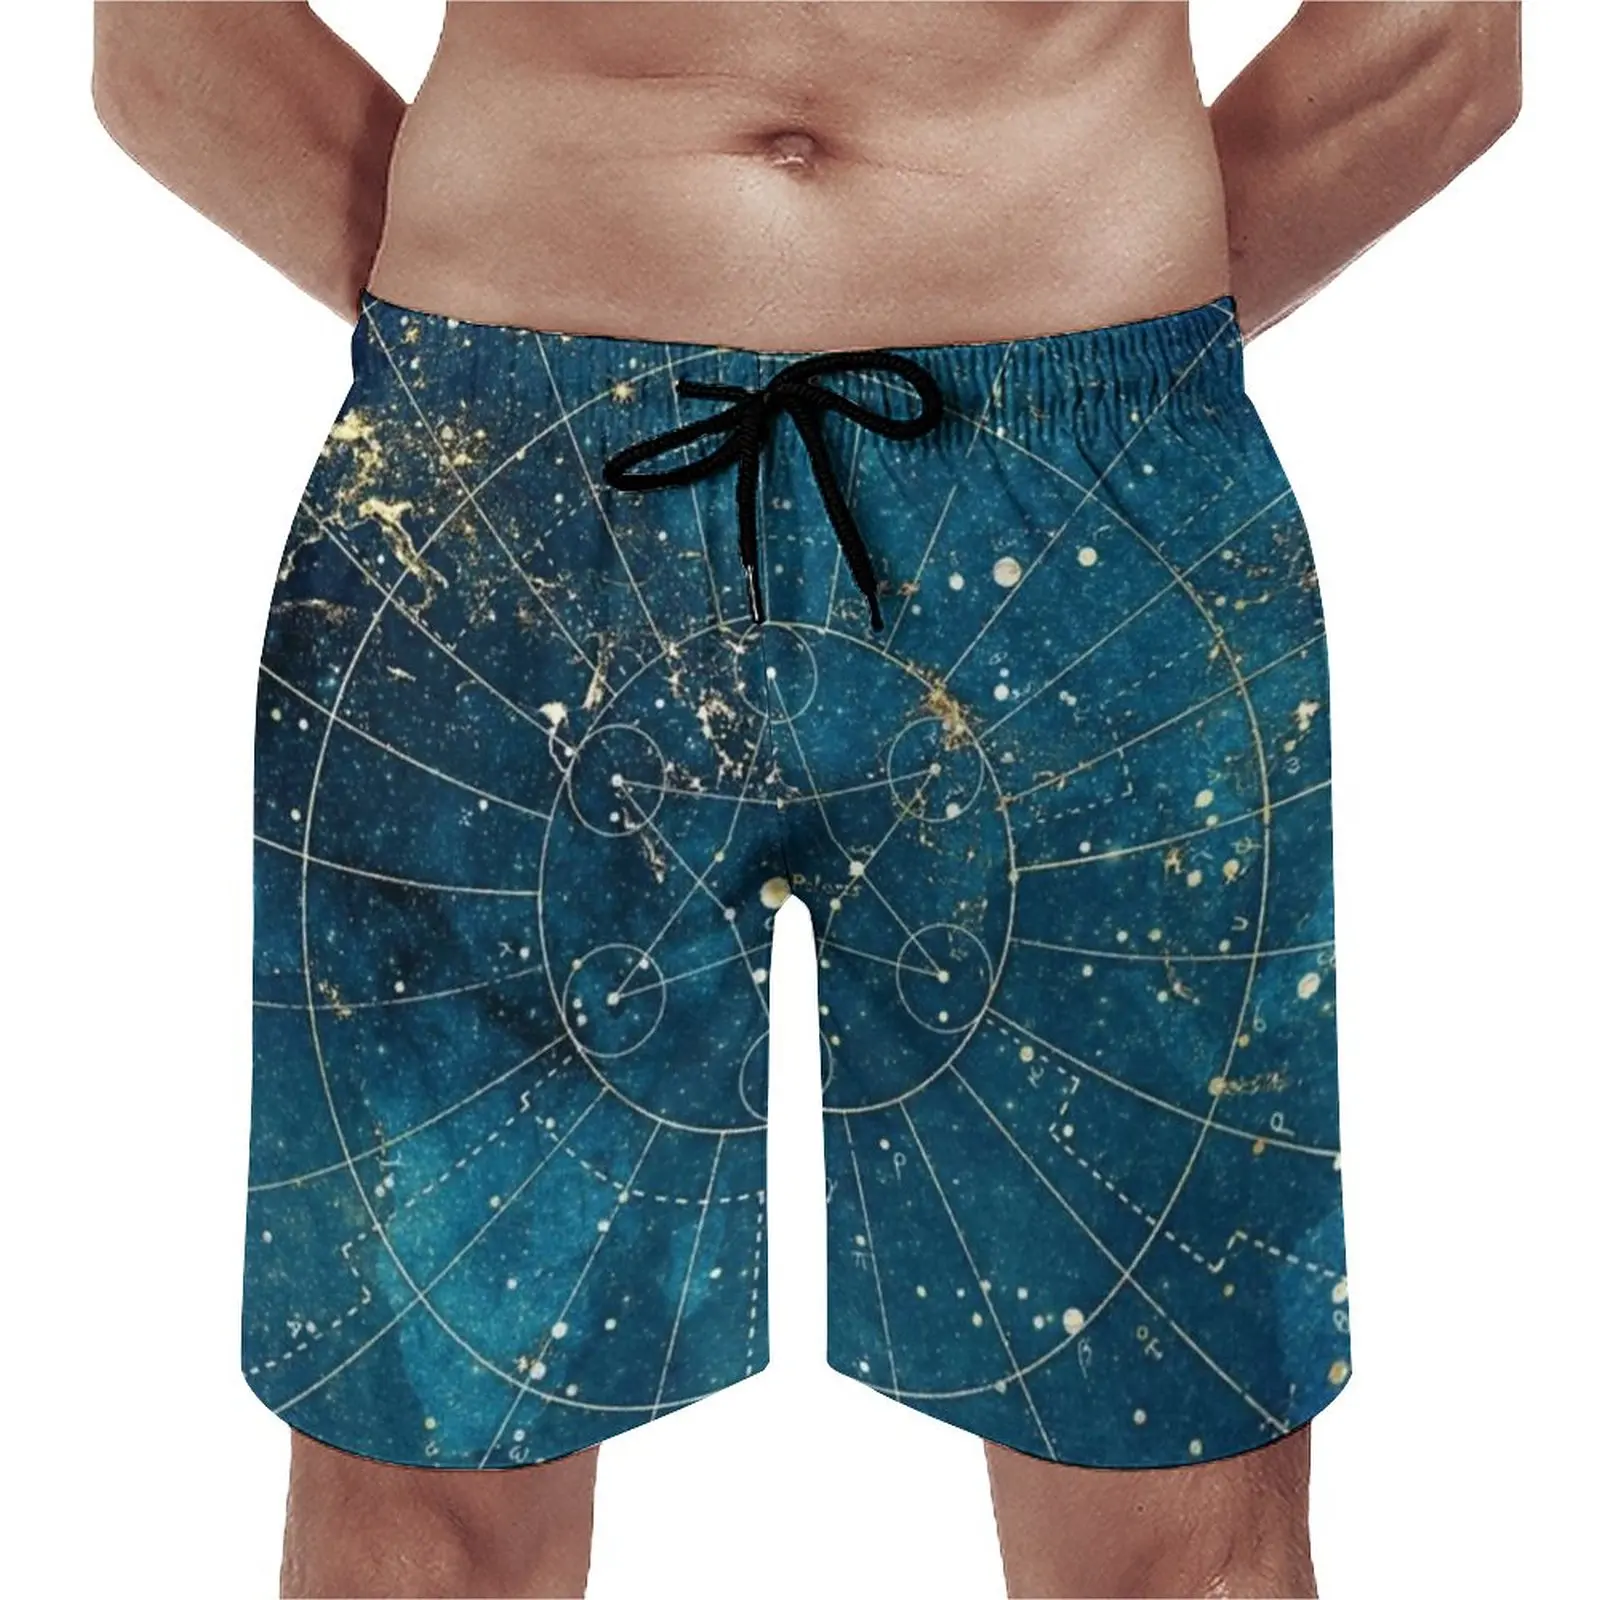 

Summer Gym Shorts Night Symbol Print Surfing Star Map City Lights Design Board Short Pants Fast Dry Swimming Trunks Plus Size